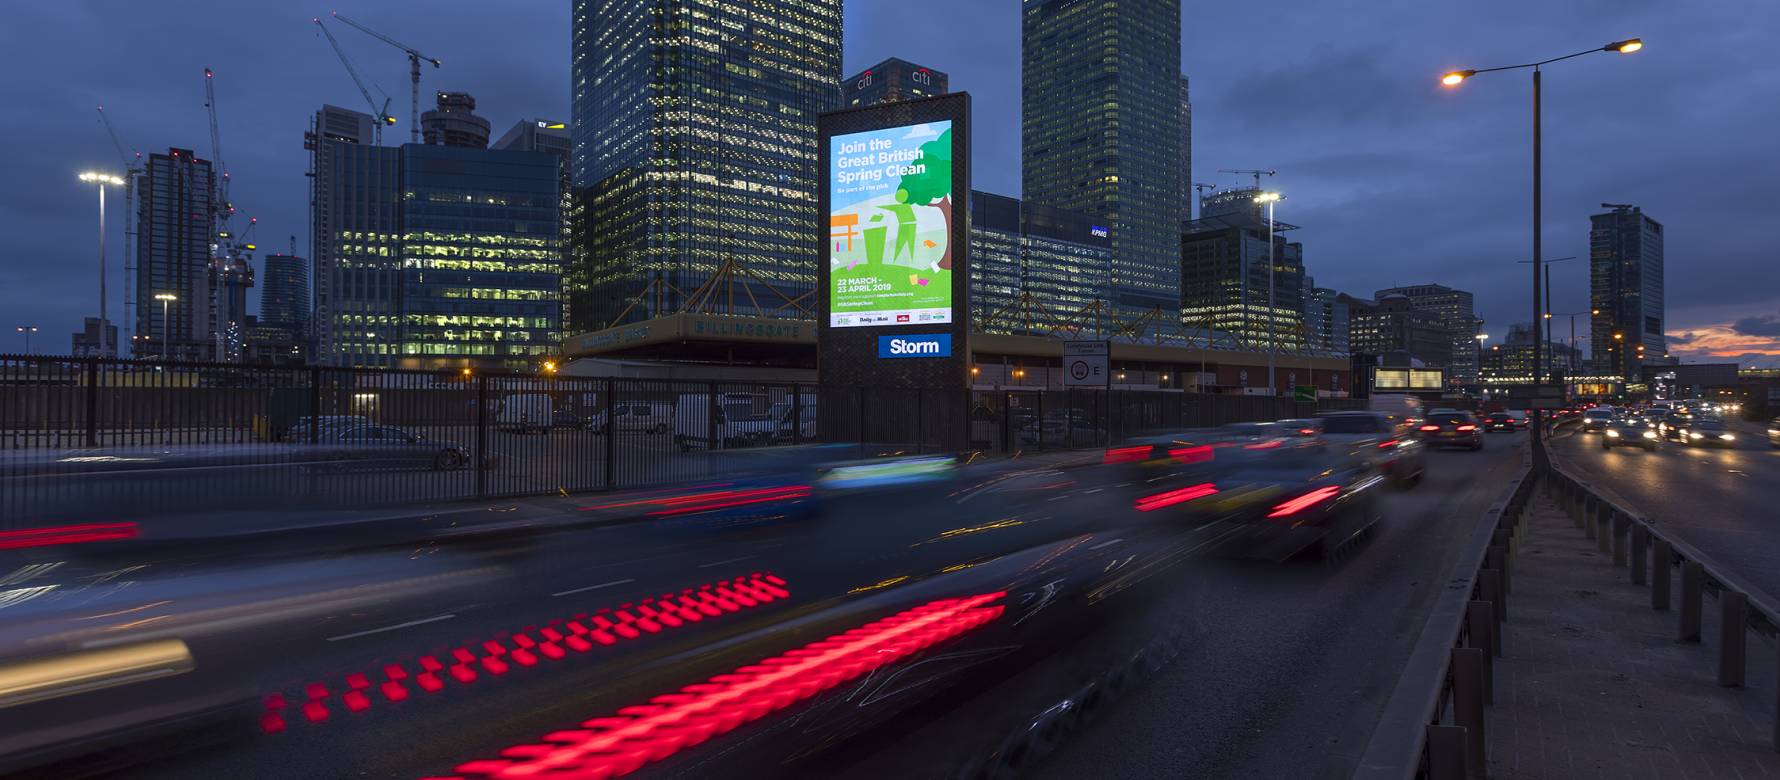 An advert for Keep Britain Tidy's Great British Spring Clean on a Storm billboard in Billingsgate, as cars drive past during the evening